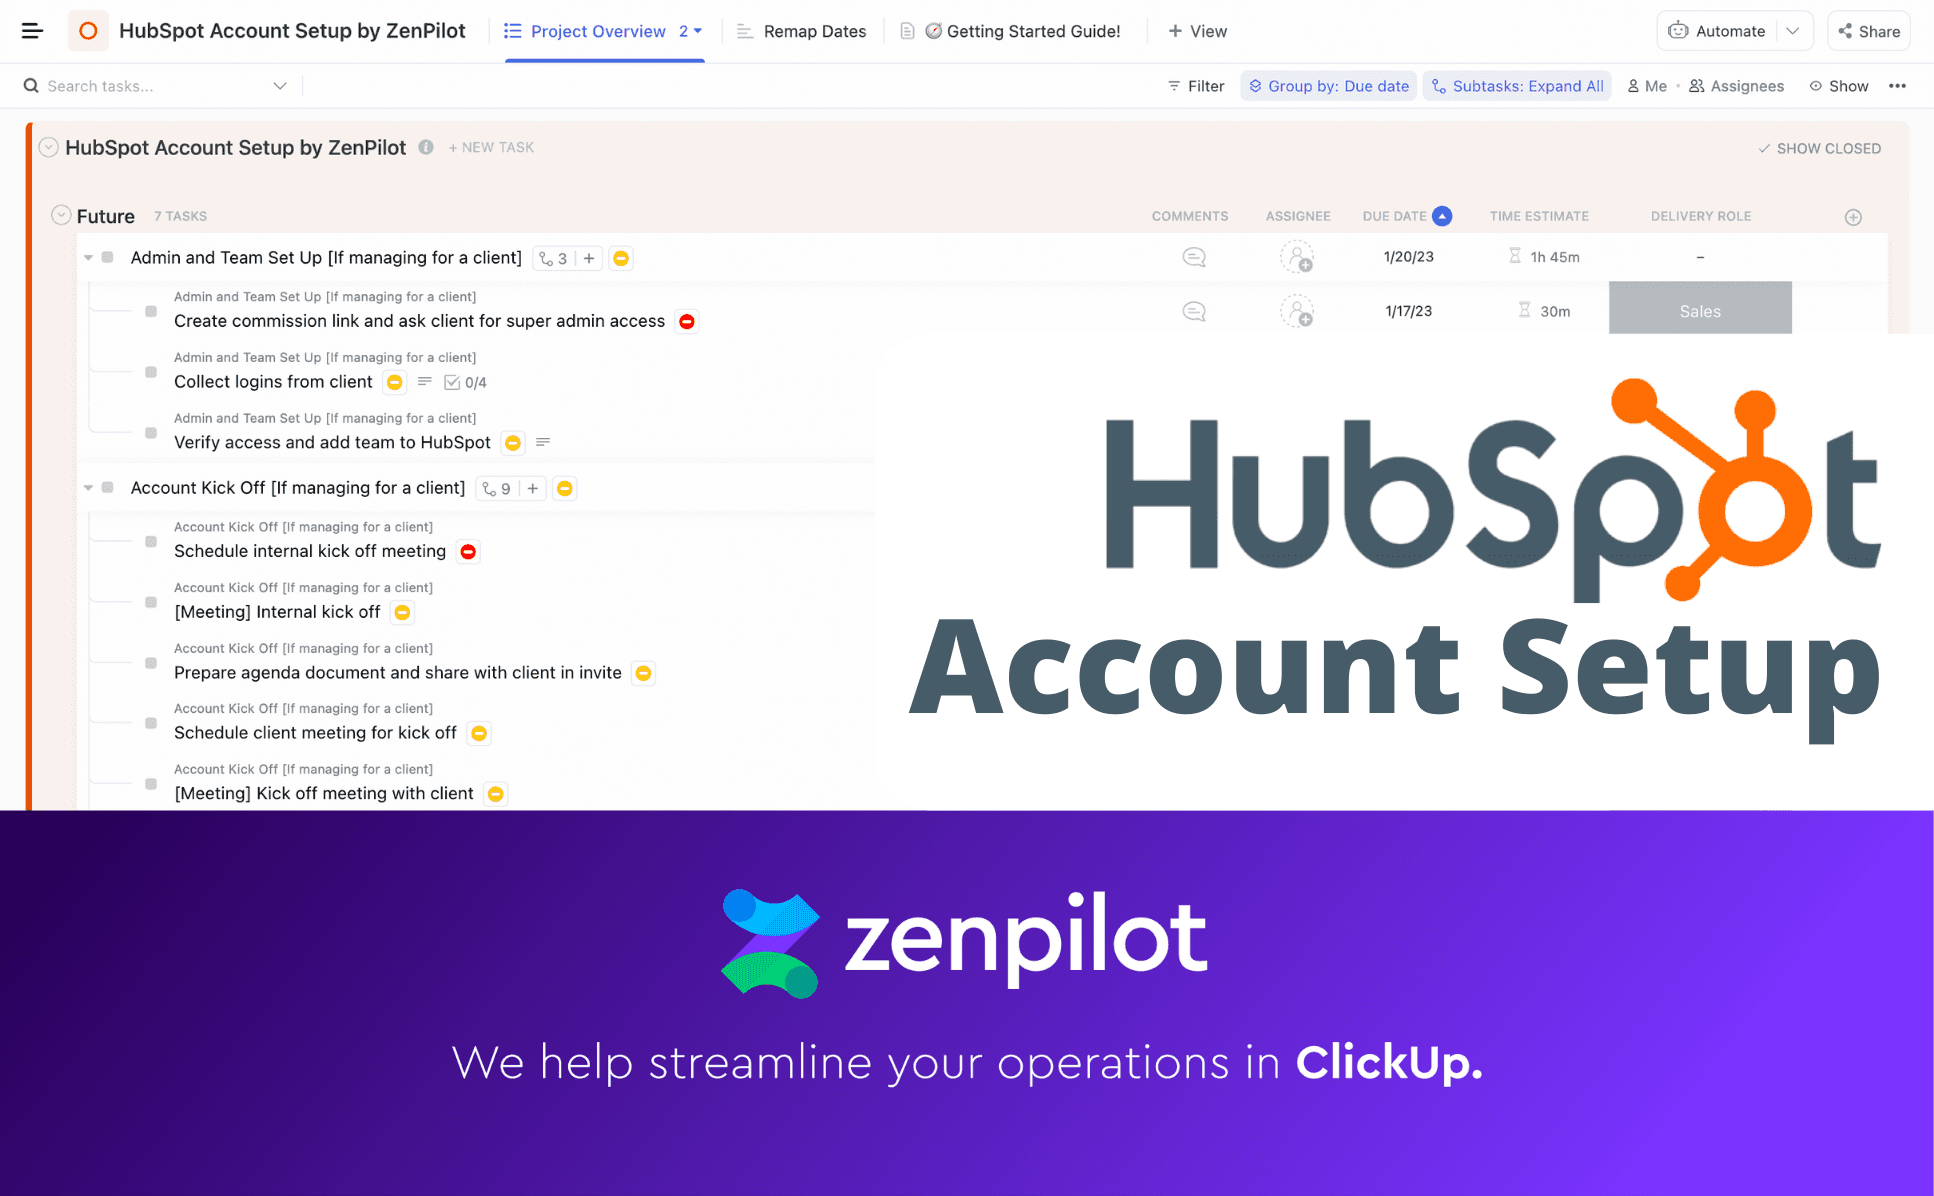 Activate this template by ZenPilot.com to unlock a step-by-step task list to configuring a new HubSpot account. Check out the setup doc for detailed instructions!